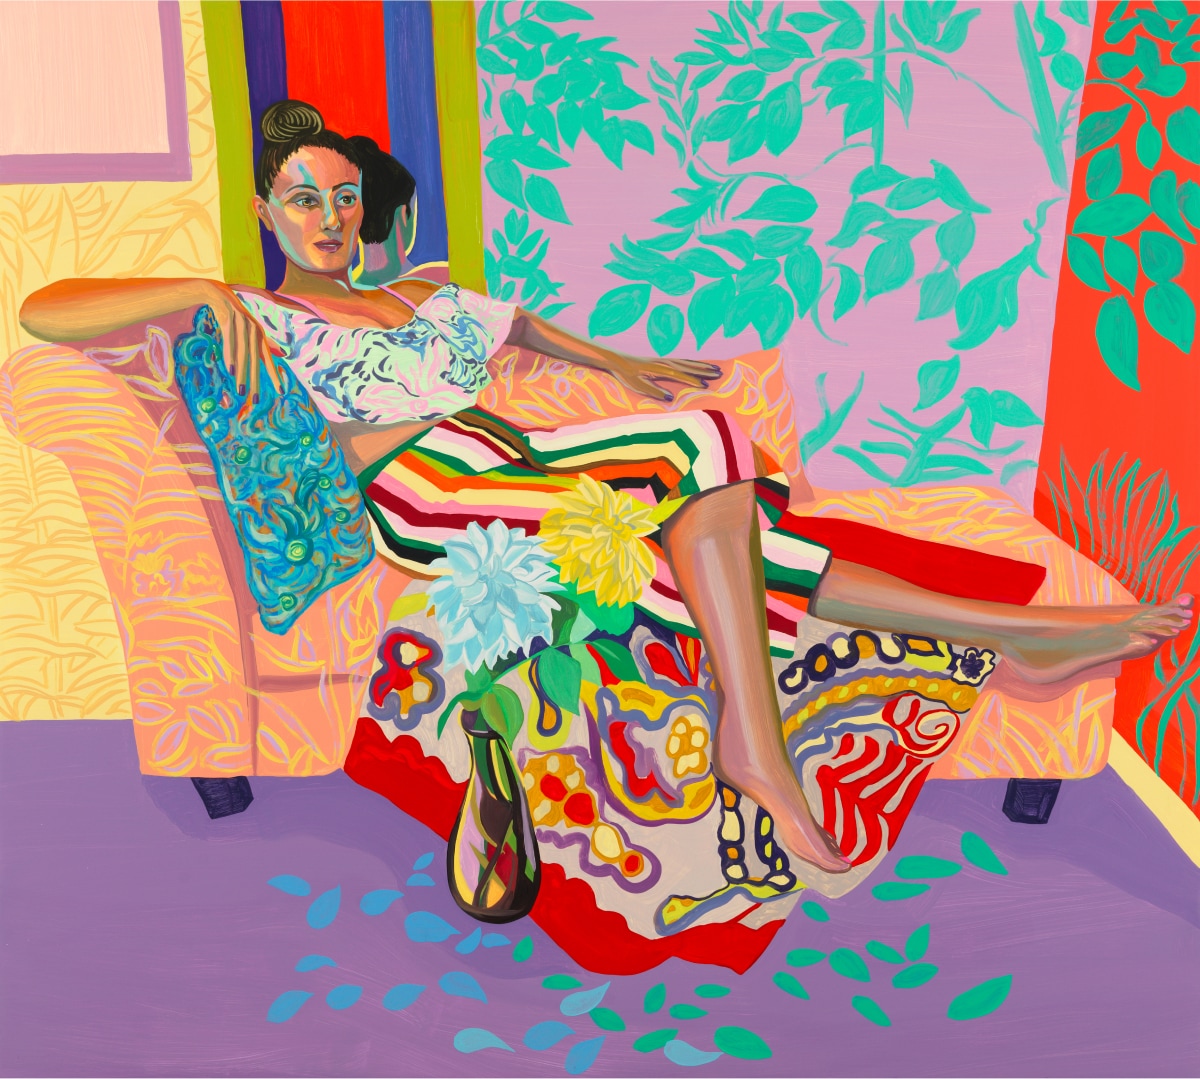 Artwork featuring a woman reclined on a chaise lounge, surrounded by vibrant patterns and textiles